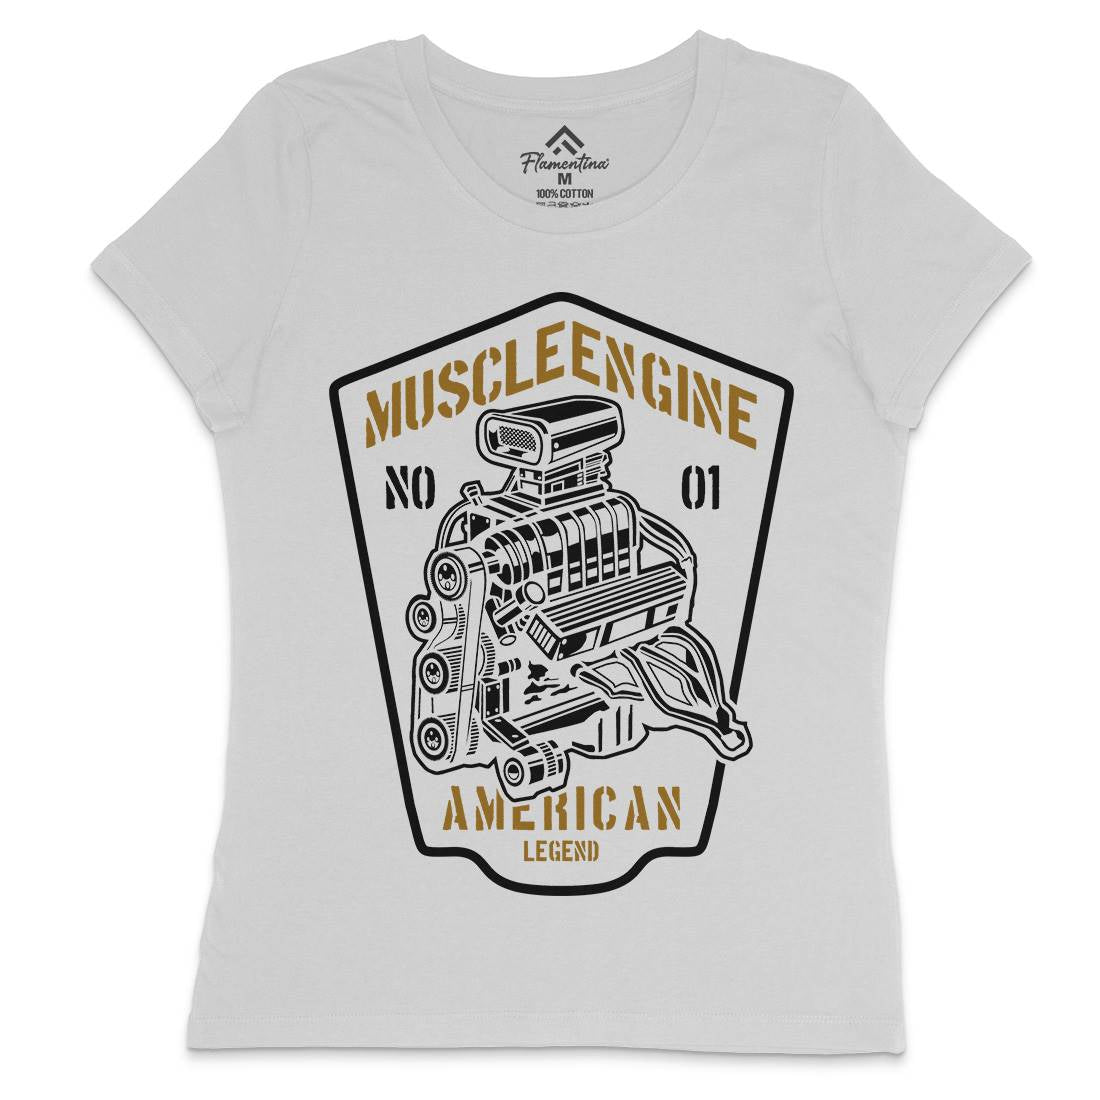 Muscle Engine Womens Crew Neck T-Shirt Cars B234